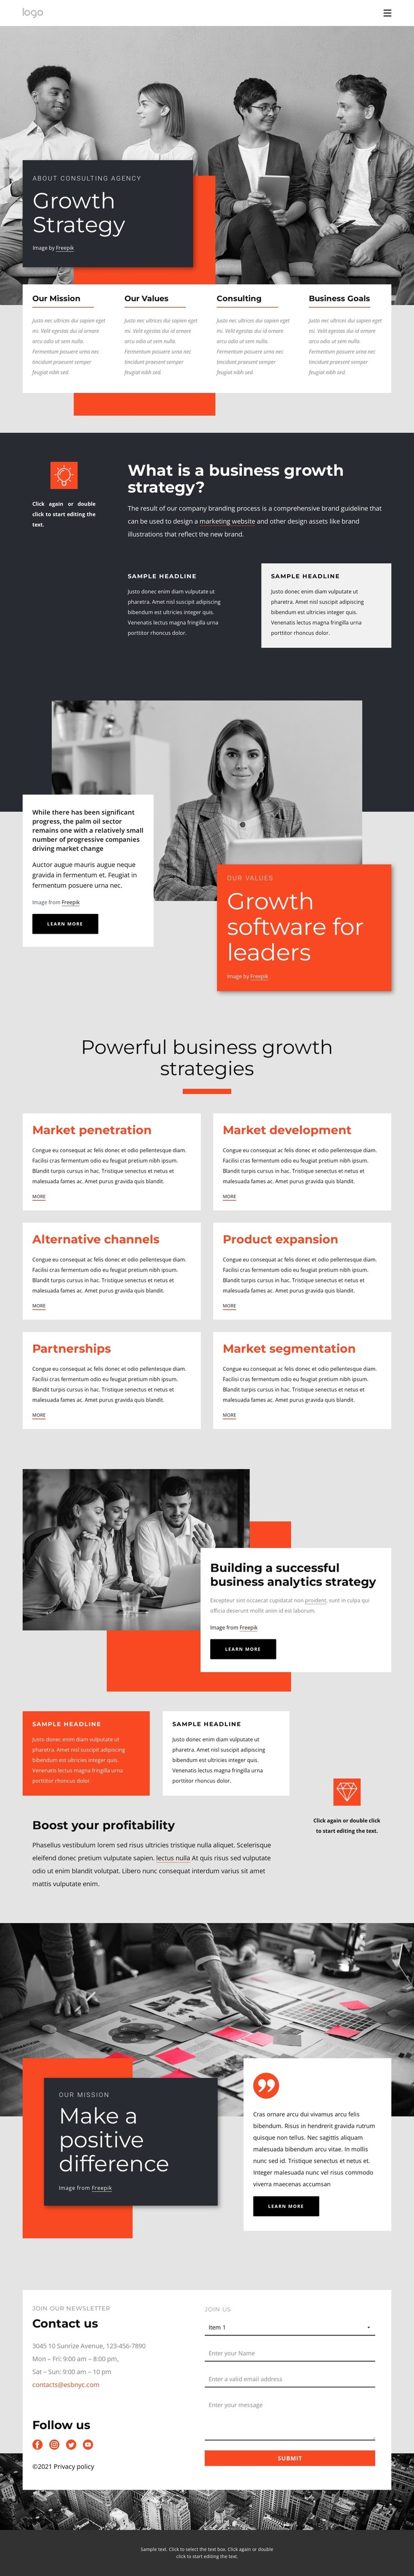 Growth strategy consultants HTML Template